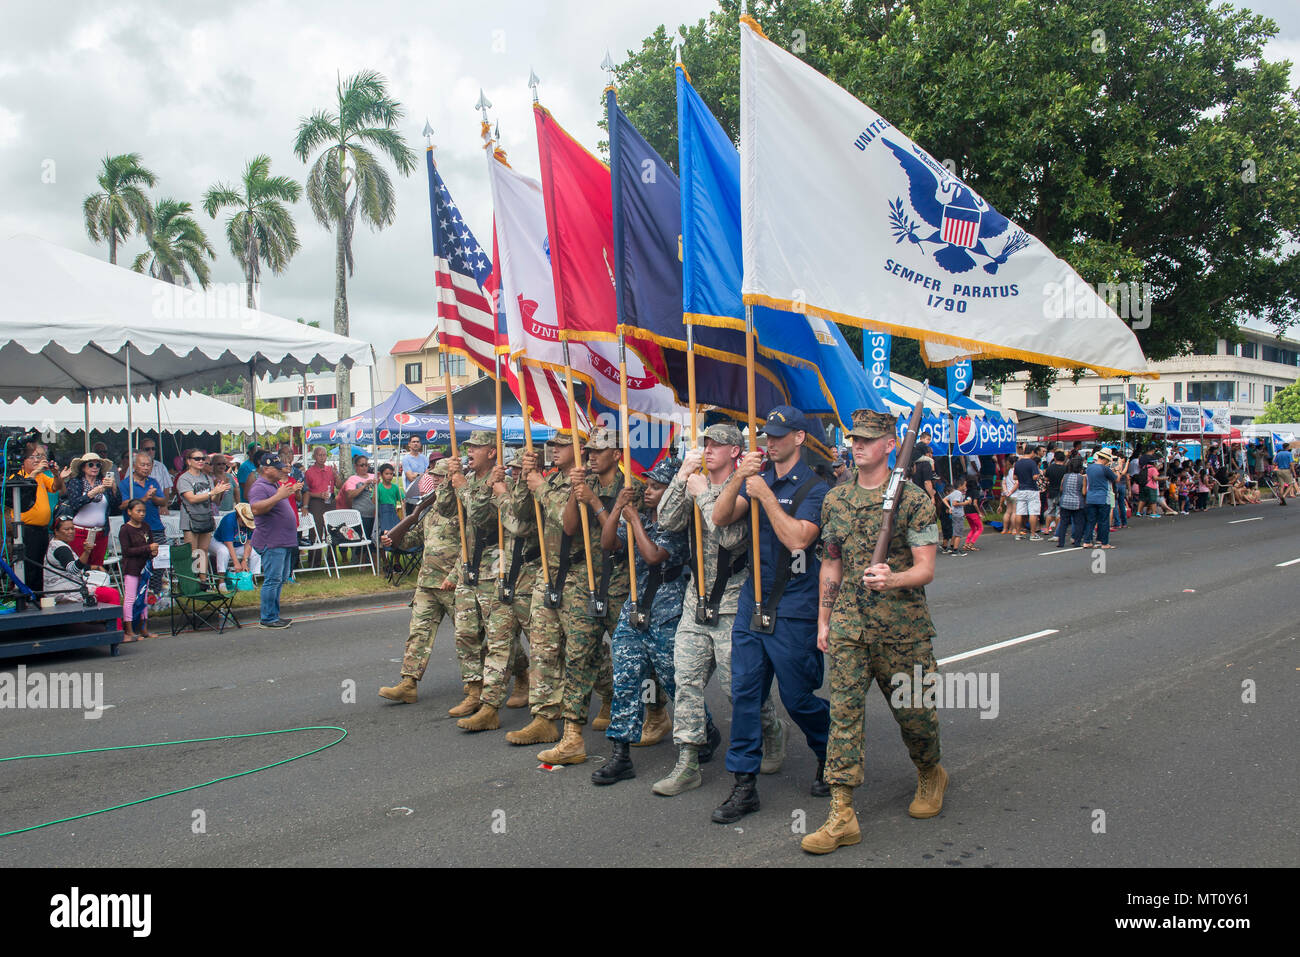 U.S. service members march during the 73rd Guam Liberation Day parade July 21, 2017, in Hagåtña, Guam. The parade commemorated 73 years since U.S. armed forces liberated the island from Japanese occupation. During World War II, Japan seized Guam on December 10, 1941, and on July 21, 1944, the U.S. armed forces liberated the island. (U.S. Air Force photo by Airman 1st Class Christopher Quail) Stock Photo